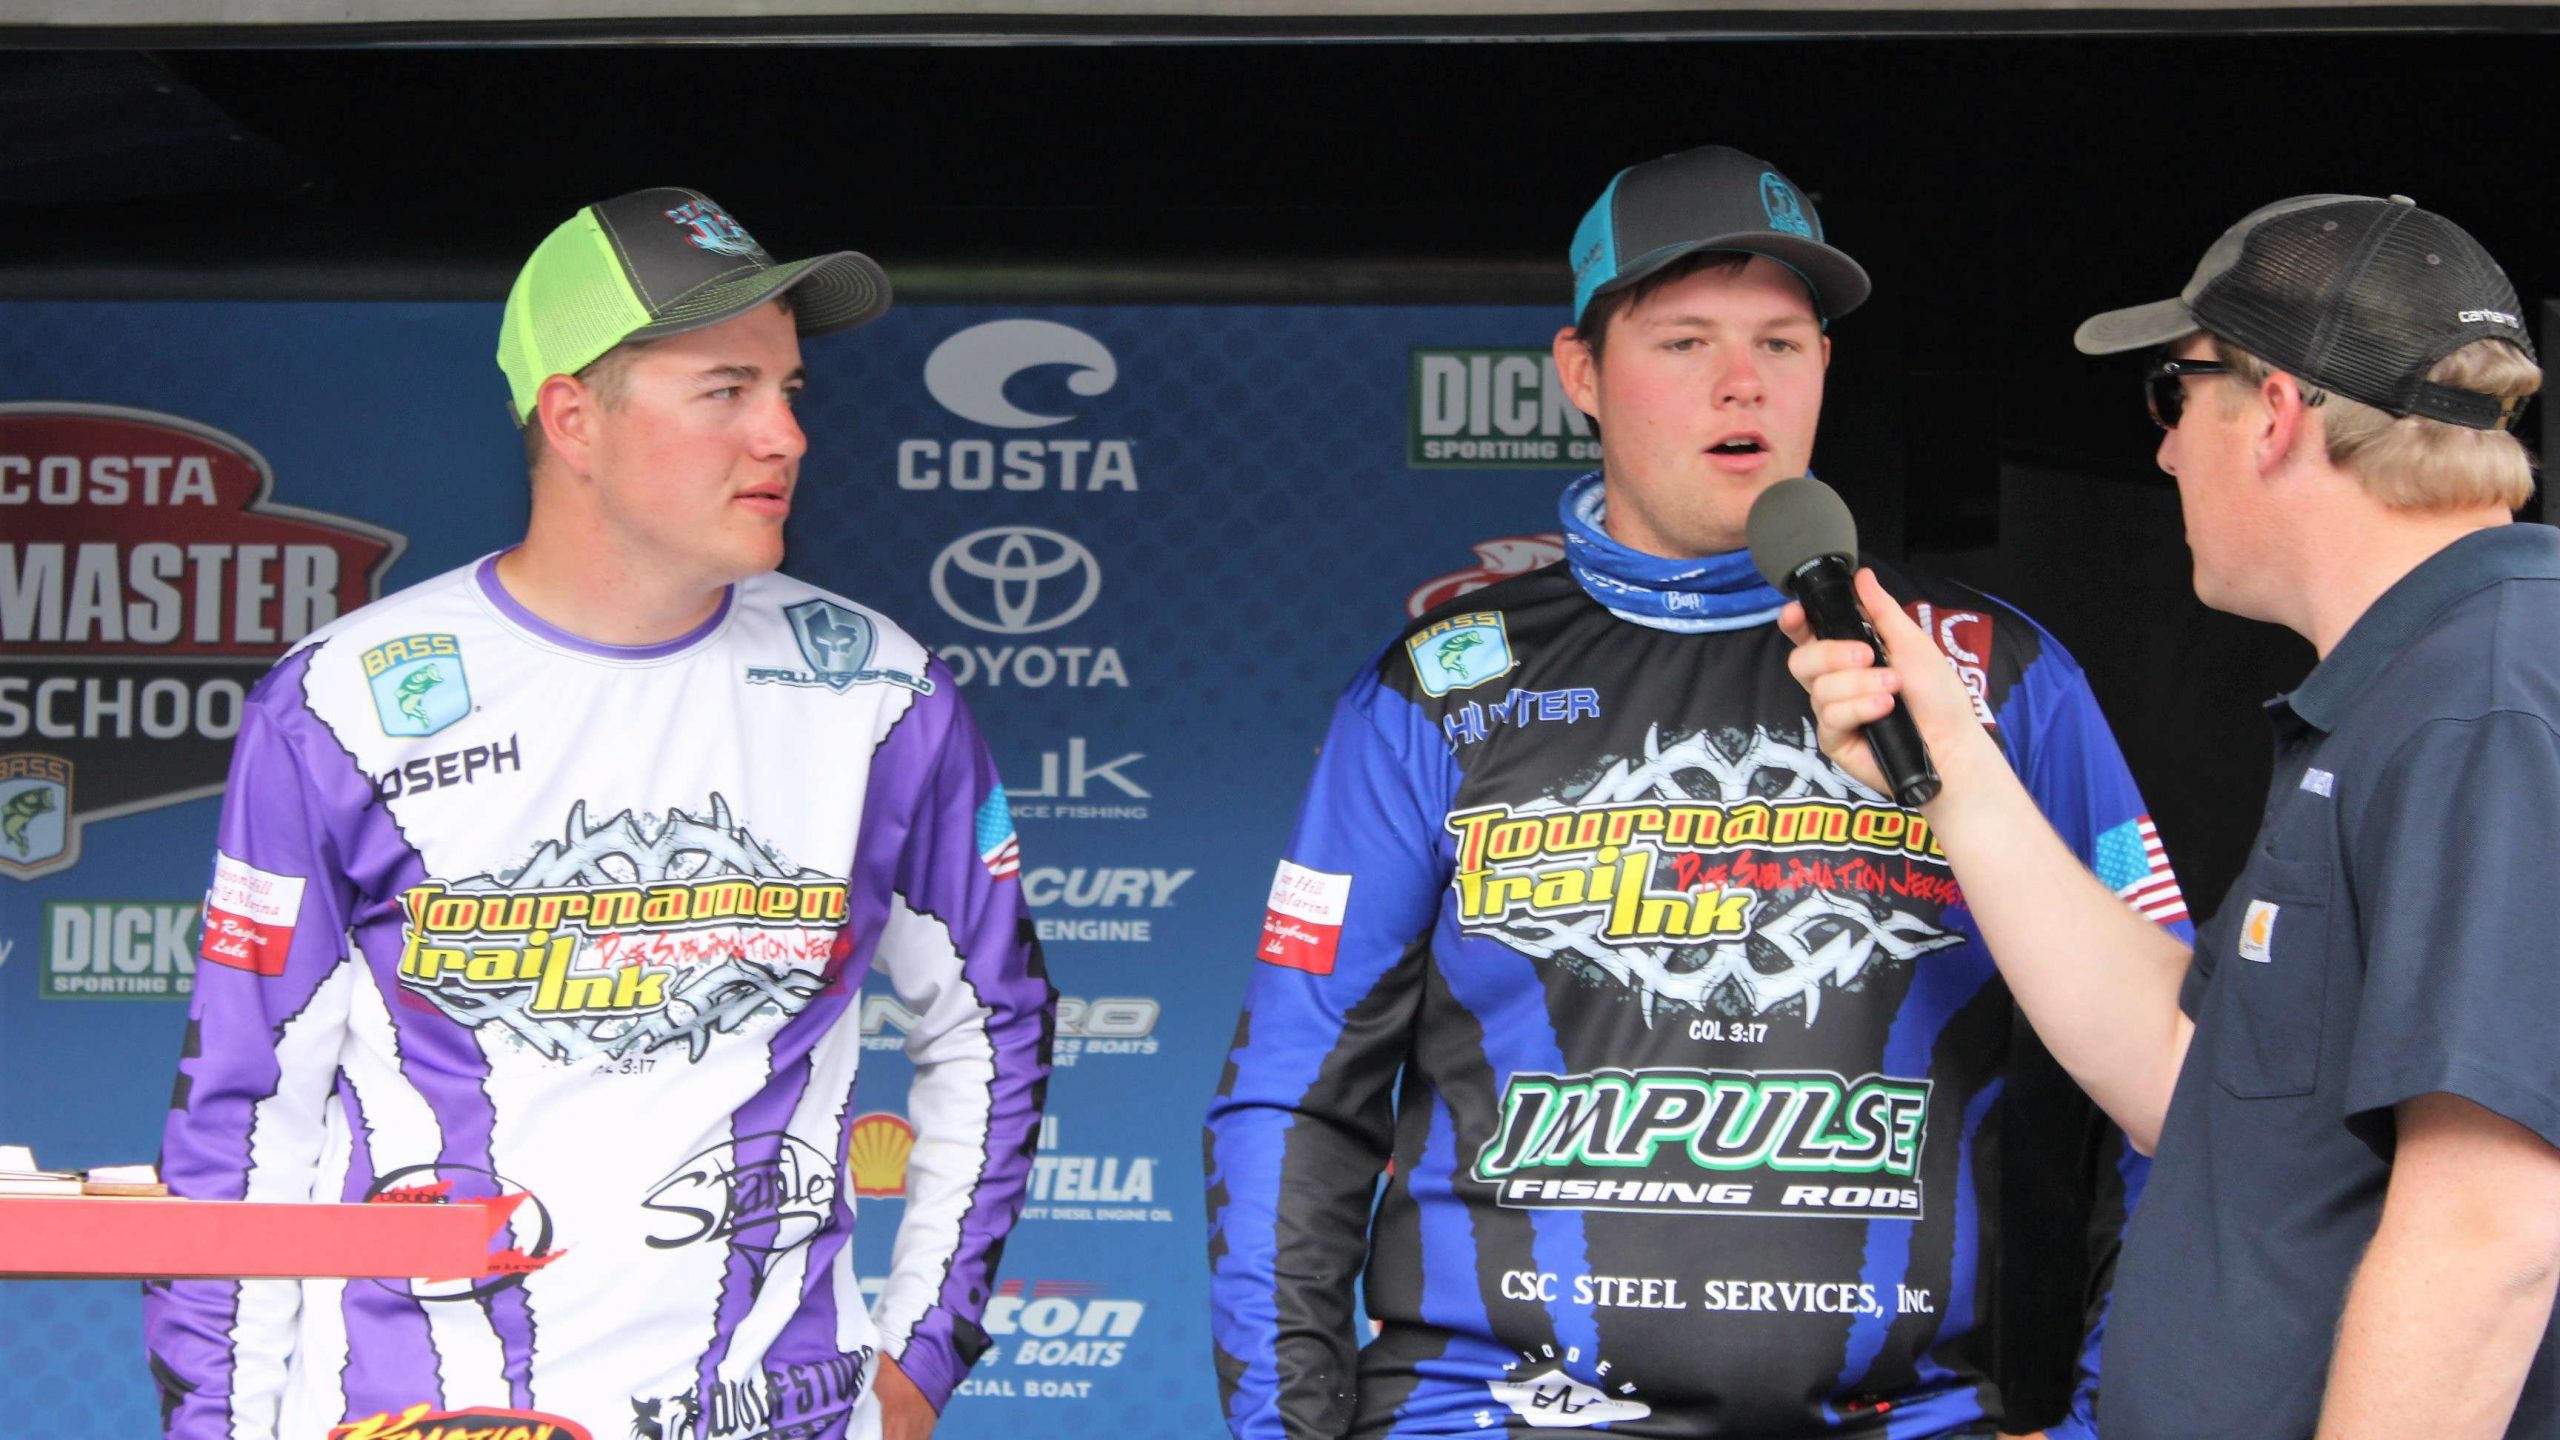 The Texas tandem of Joseph Bruener and Hunter Curry talk with Hank Weldon after weighing five bass that totaled 11-14.